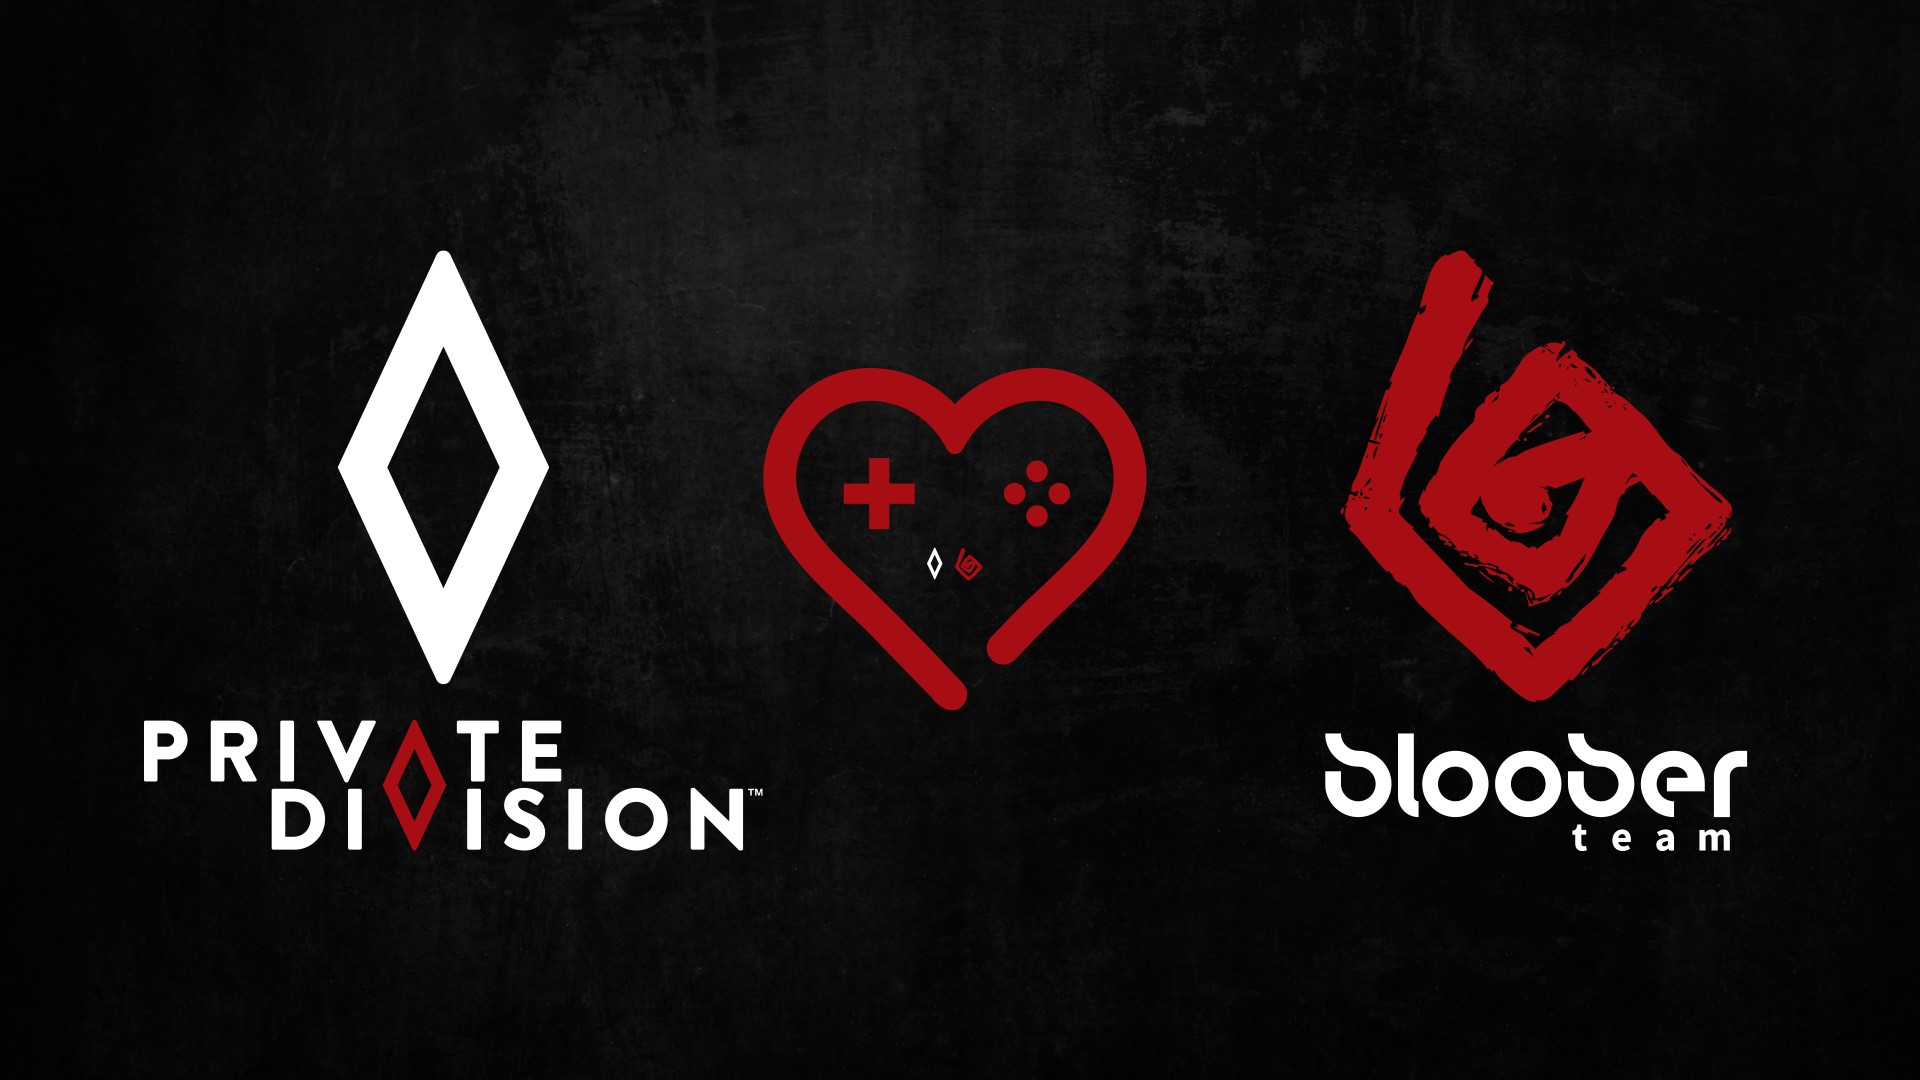 Bloober Team and Private Division’s Survival Horror Game Will be Announced This Year